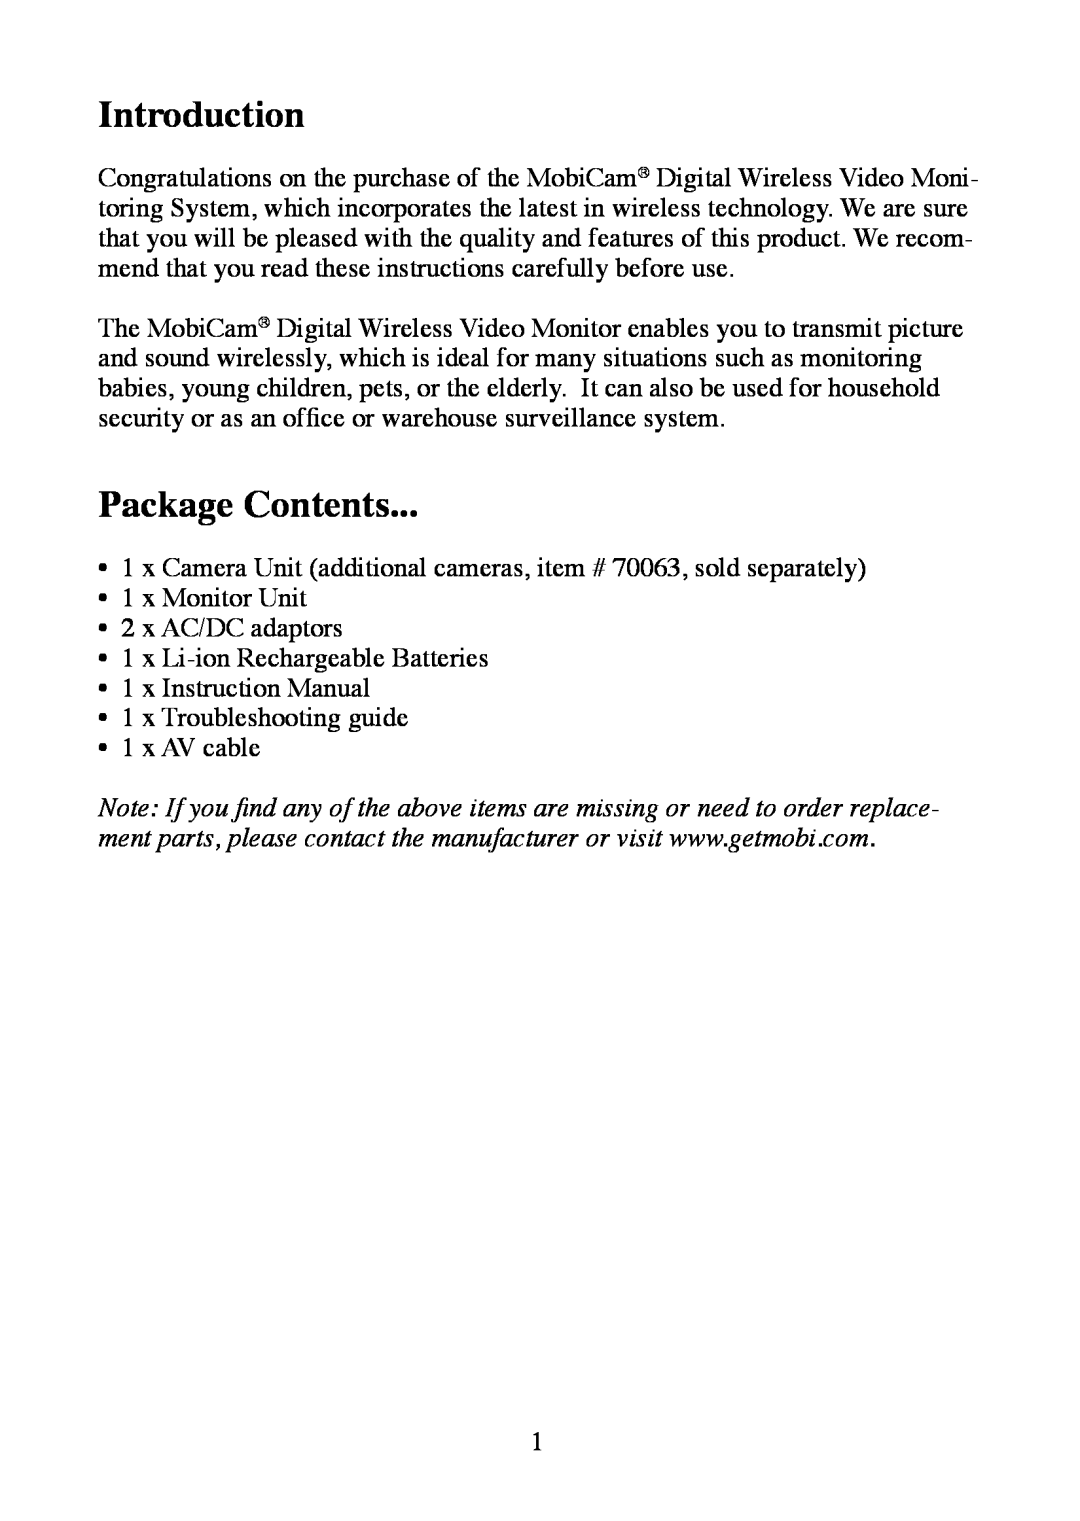 Mobi Technologies 70062 manual Introduction, Package Contents 